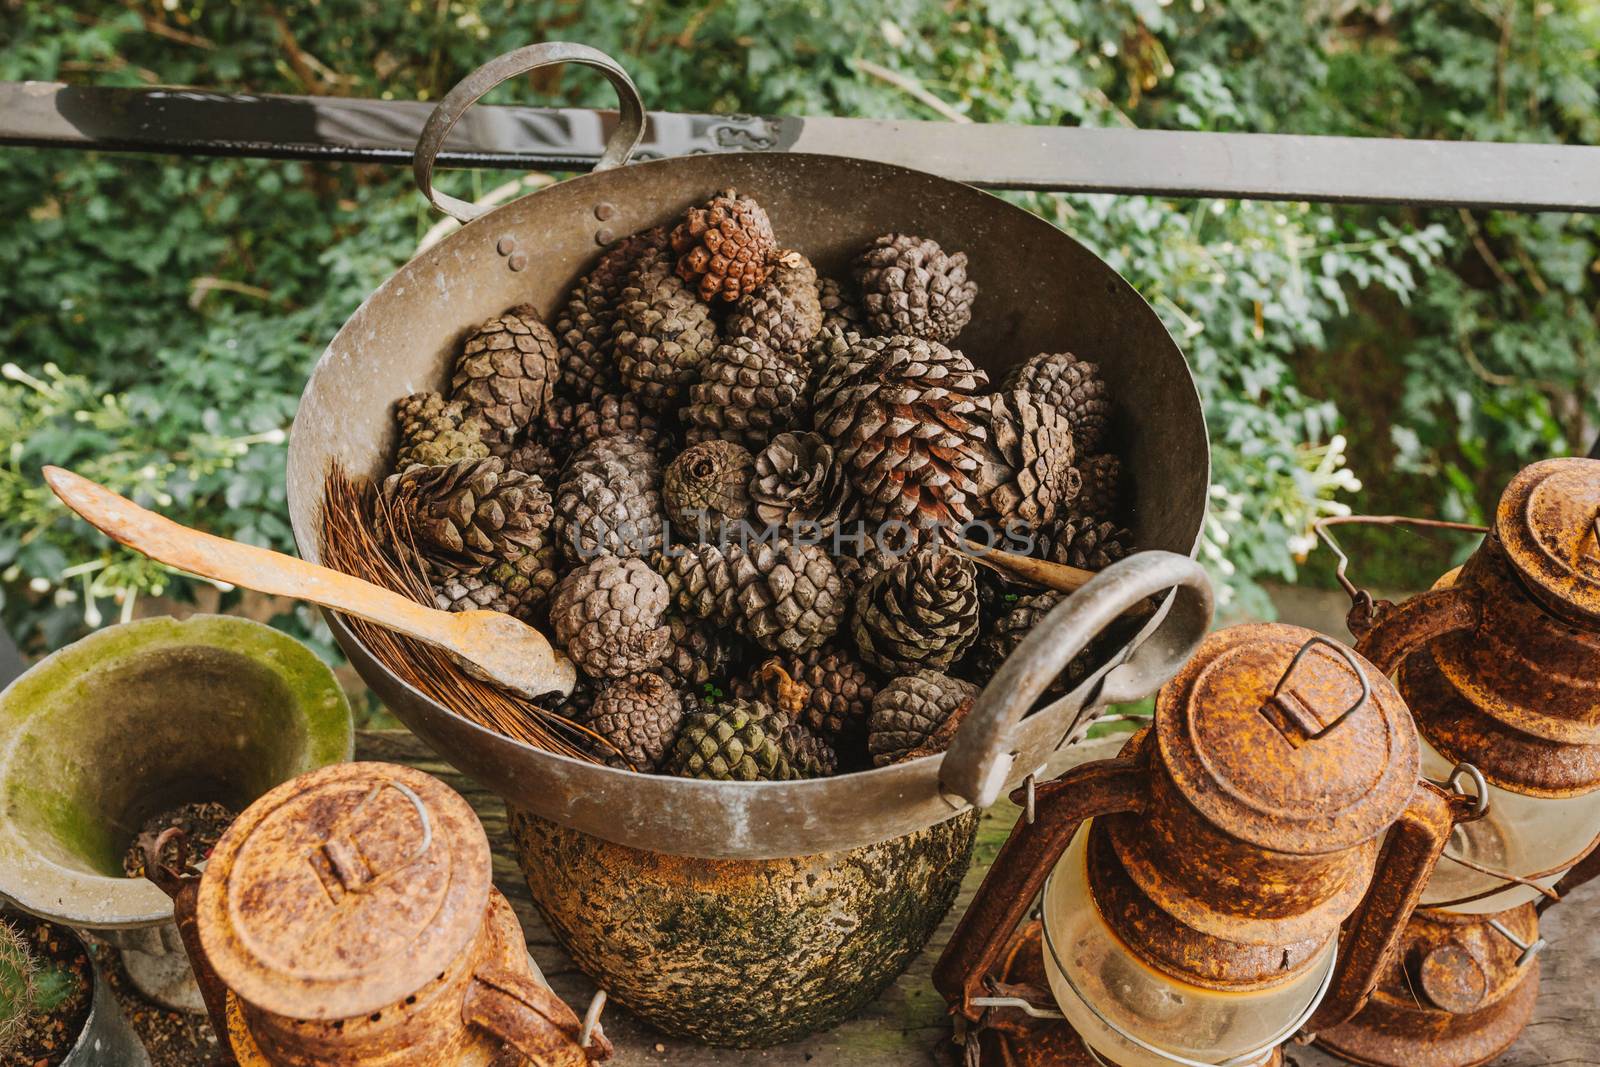 Pine cones in a rusty iron pan Ideas to decorate vintage style by nopparats